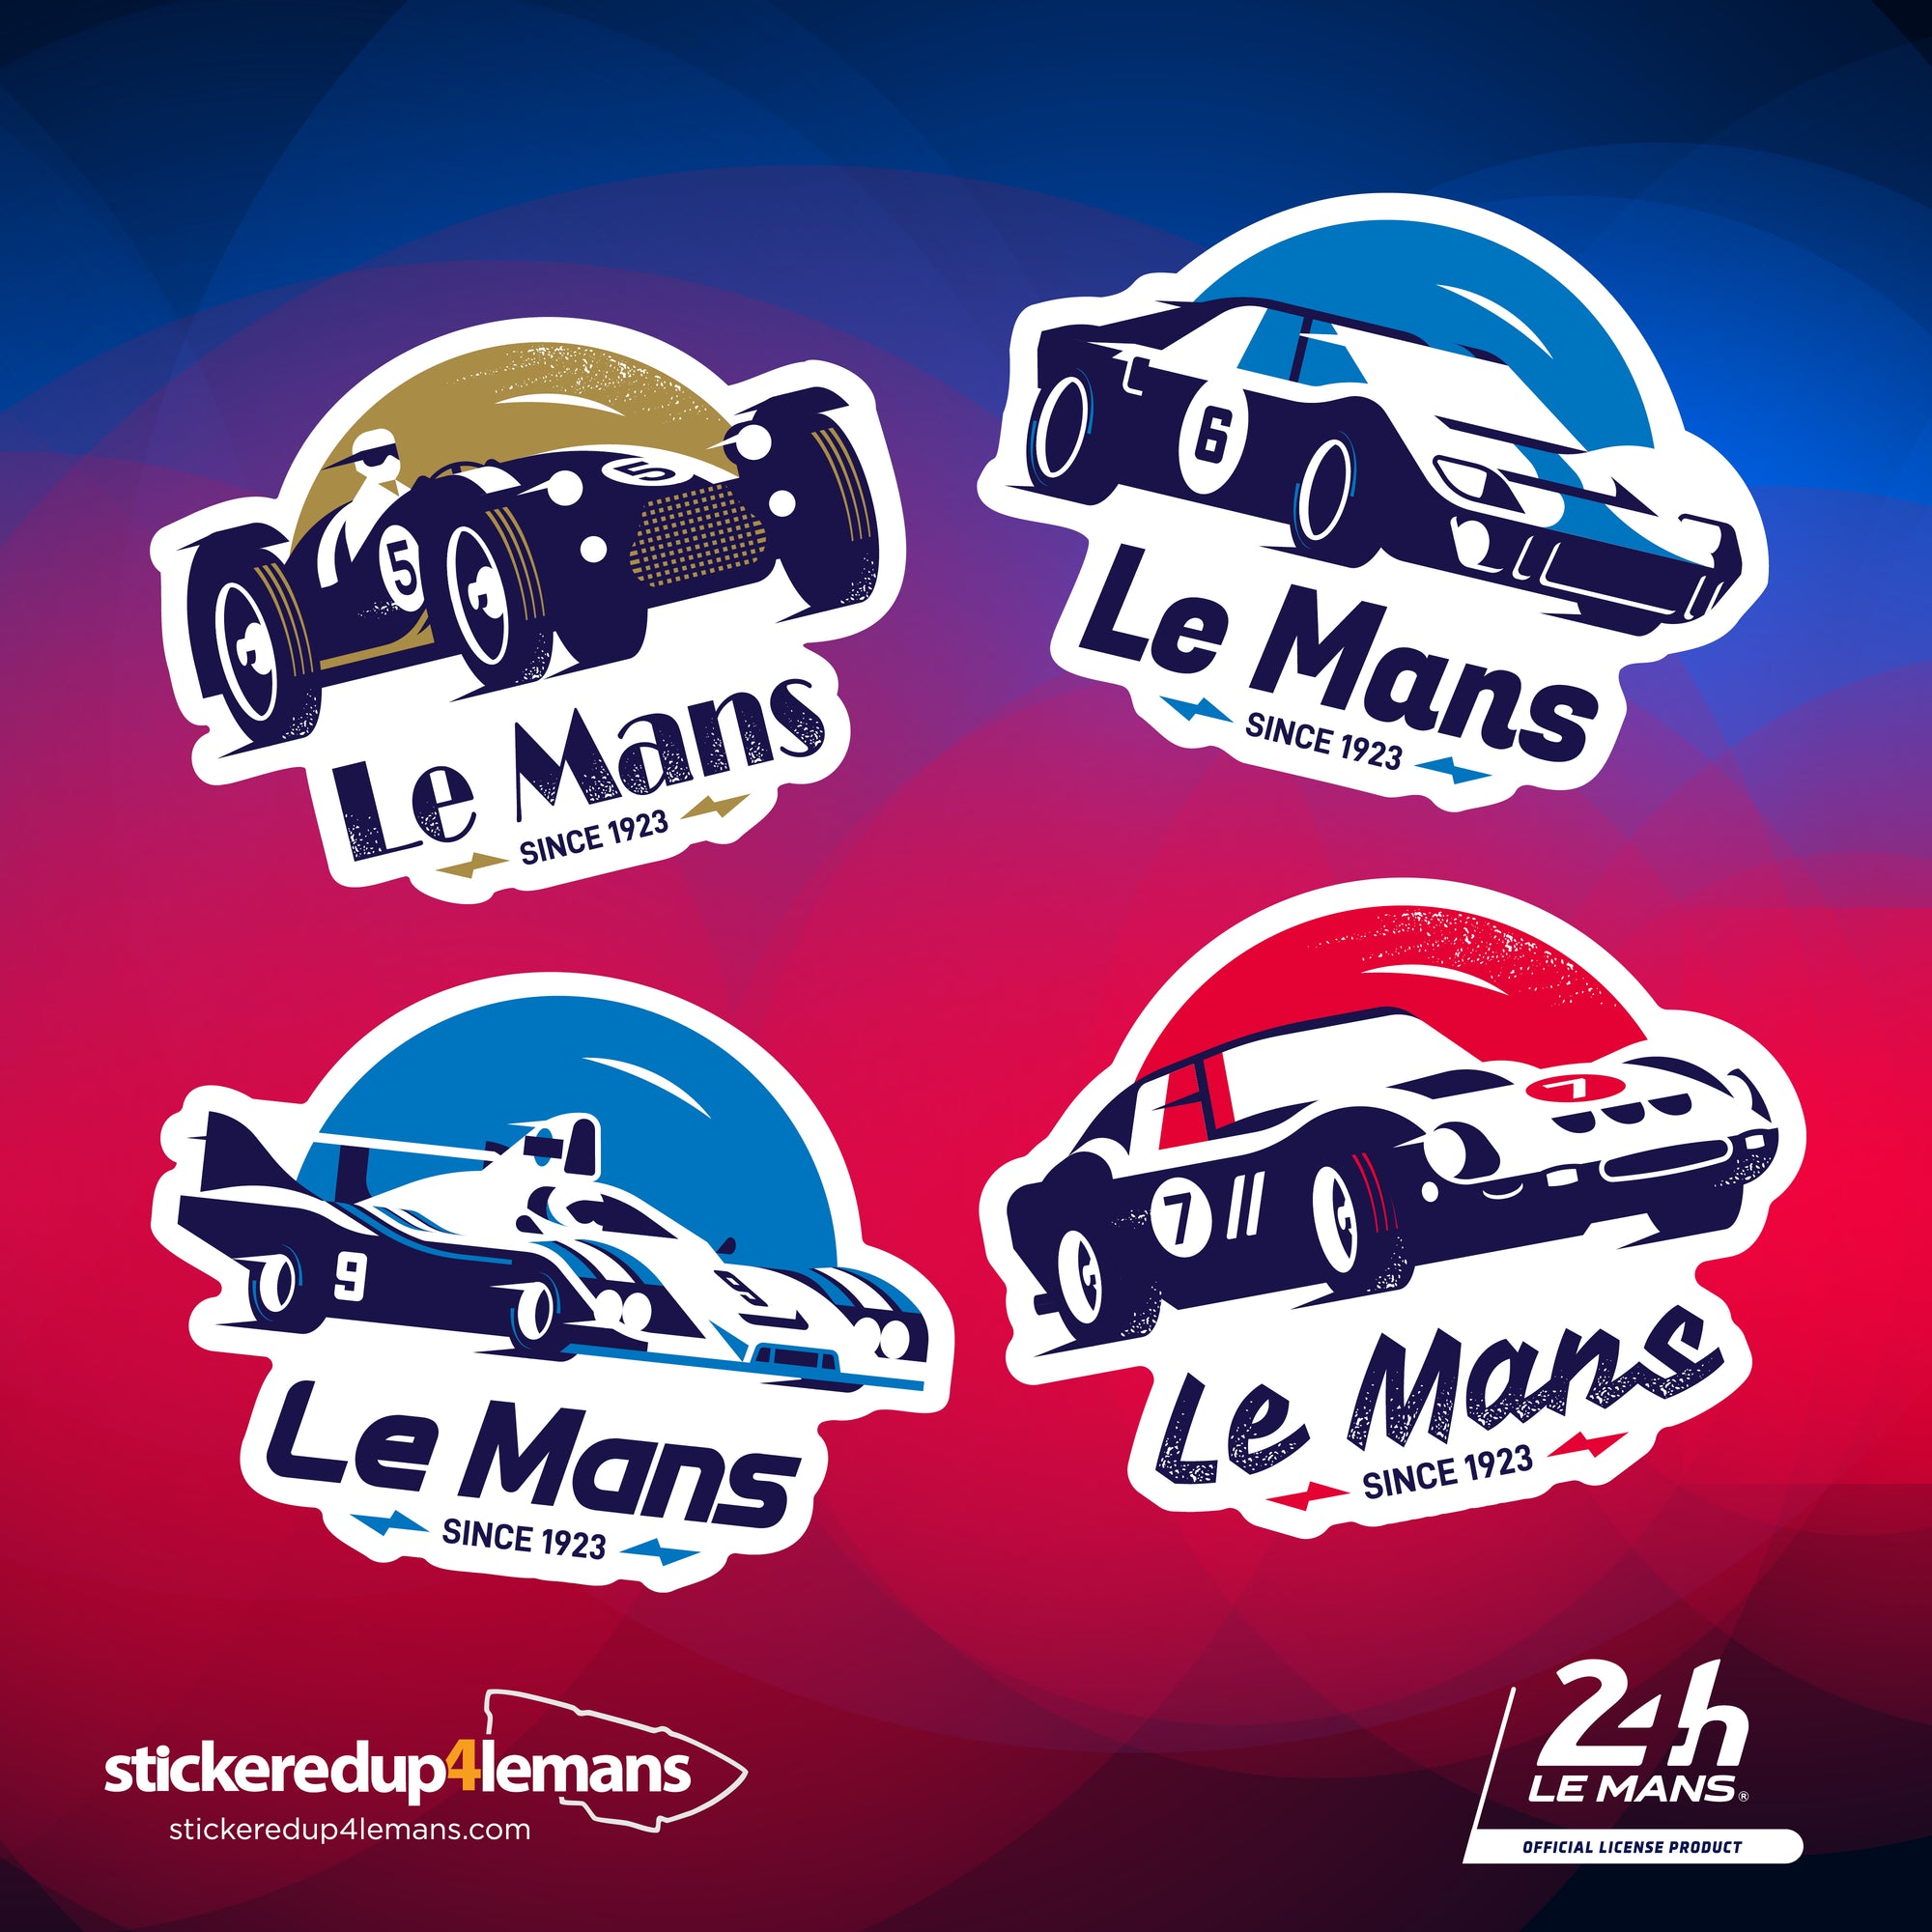 Le Mans stickers, decals and race graphics. Le Mans 24h & LM Classic